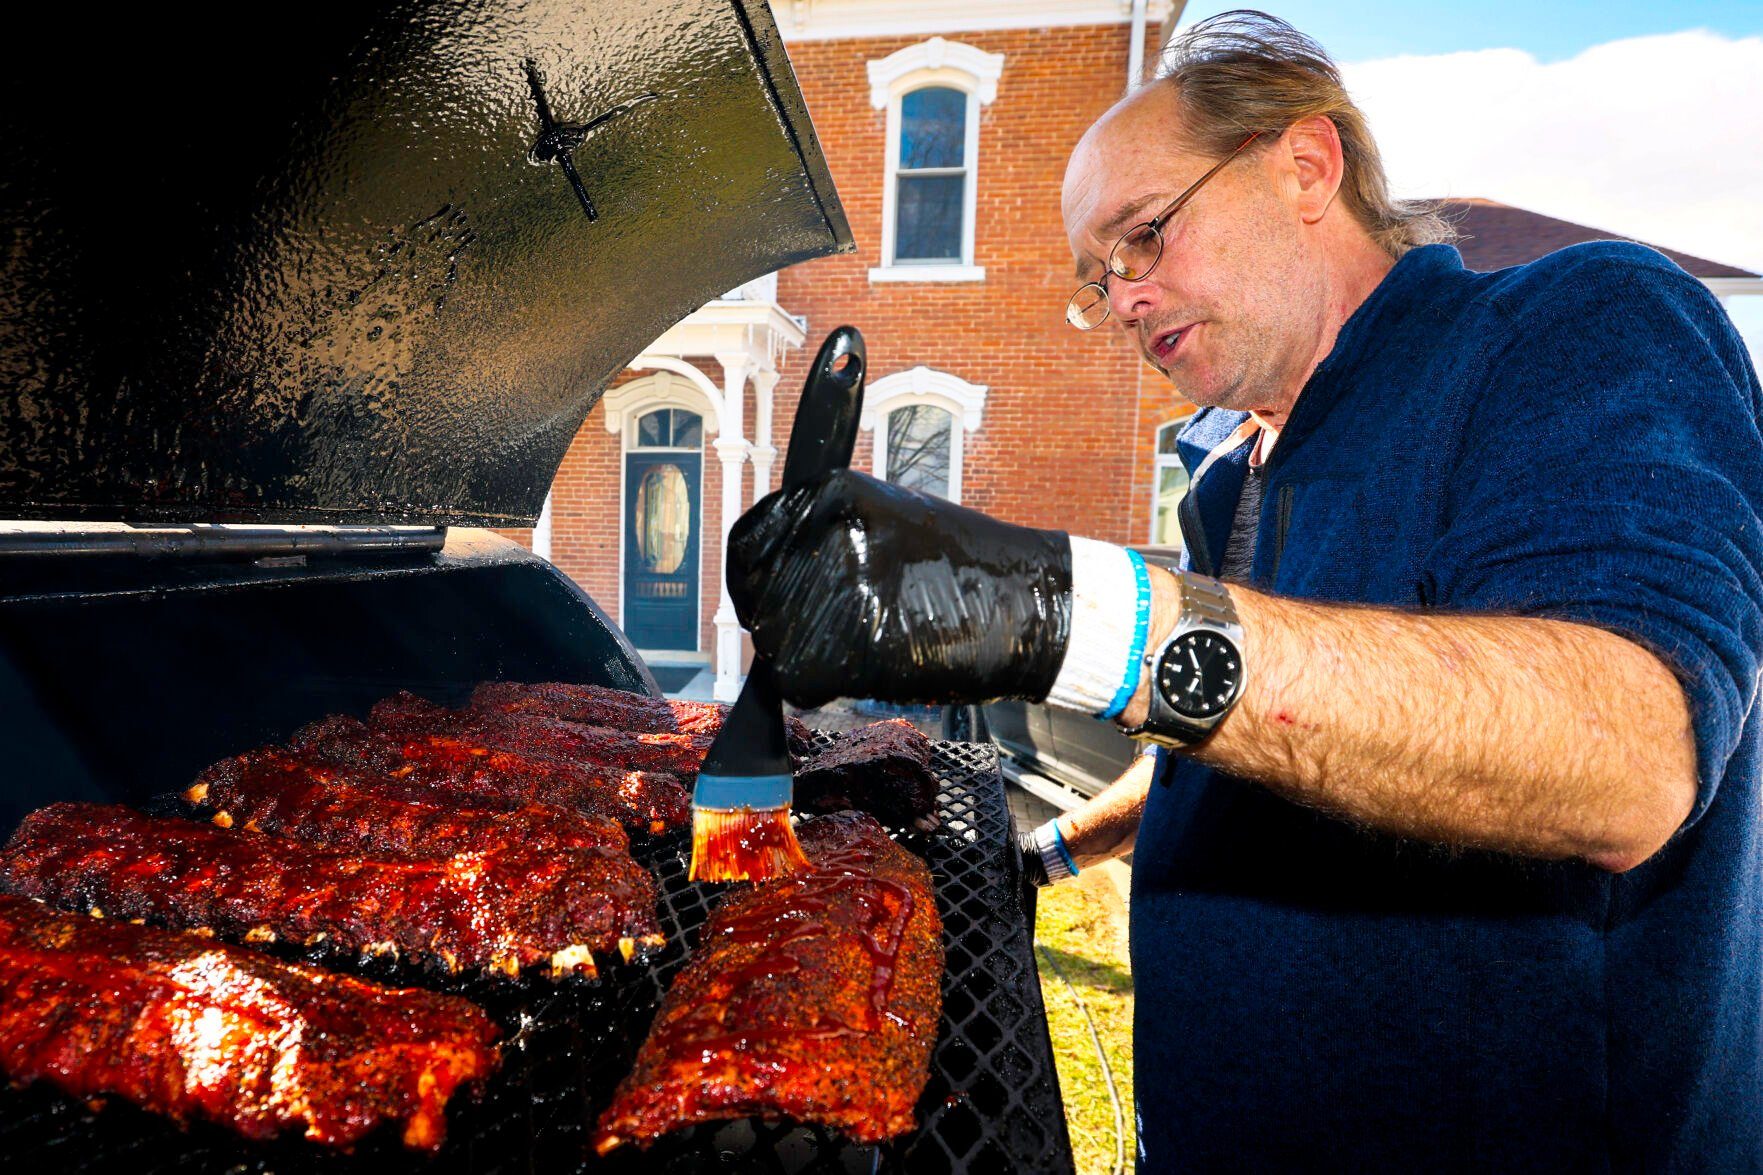 James Frank, owner of Bad Ash BBQ in Bellevue, brushes sauce over racks of ribs as they smoke, for his grand opening on Thursday, Feb. 8.    PHOTO CREDIT: Thomas Eckermann